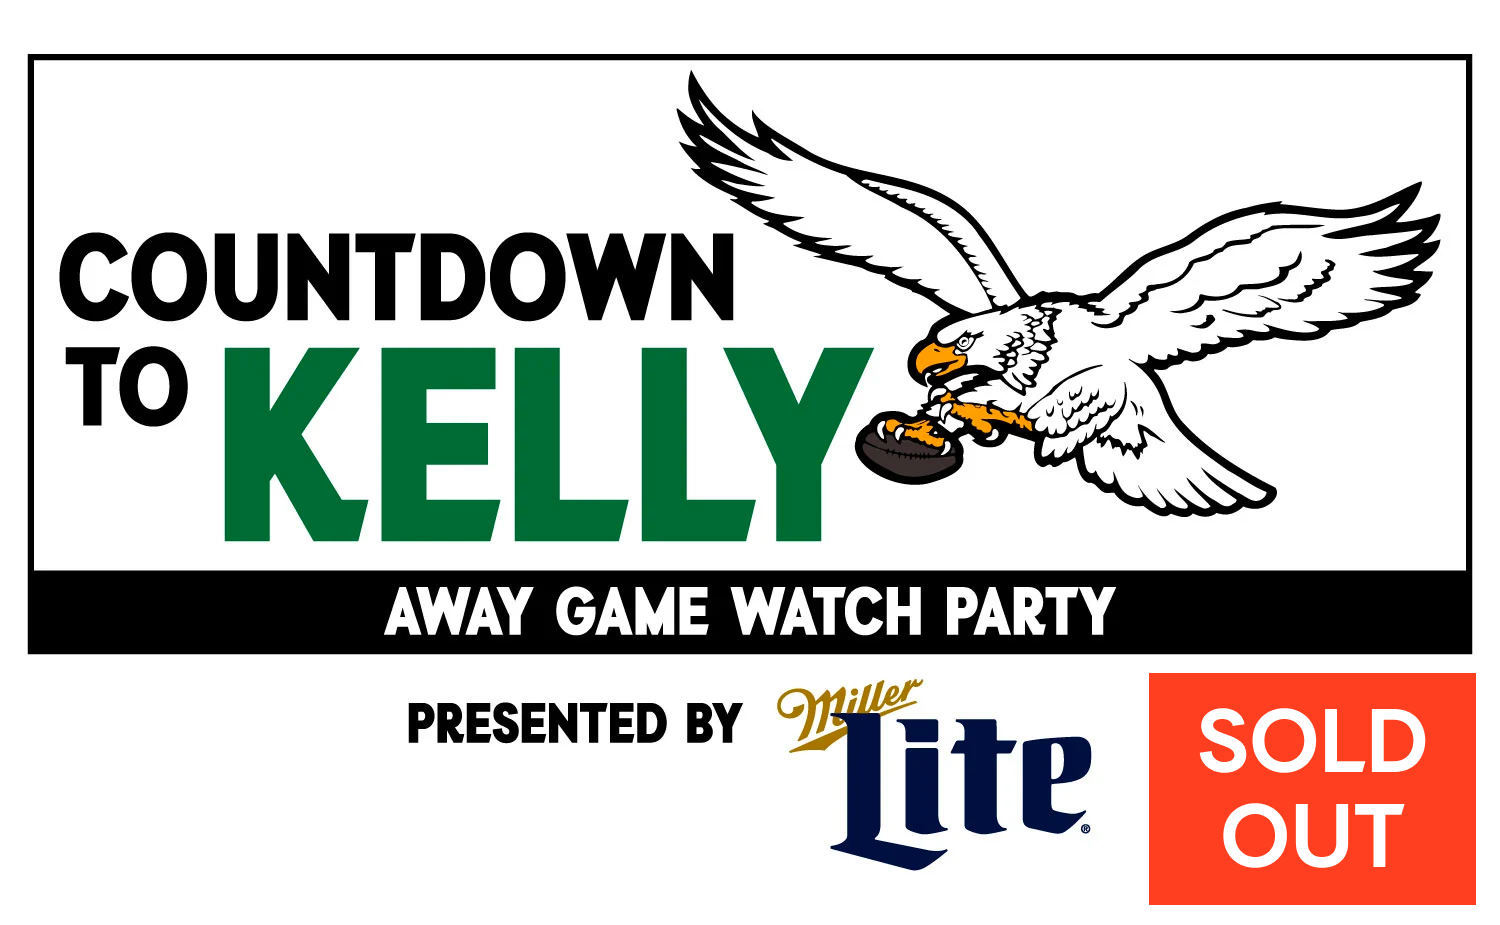 Eagles fans, the time has come! Kelly Green apparel goes on sale Monday at  9 AM